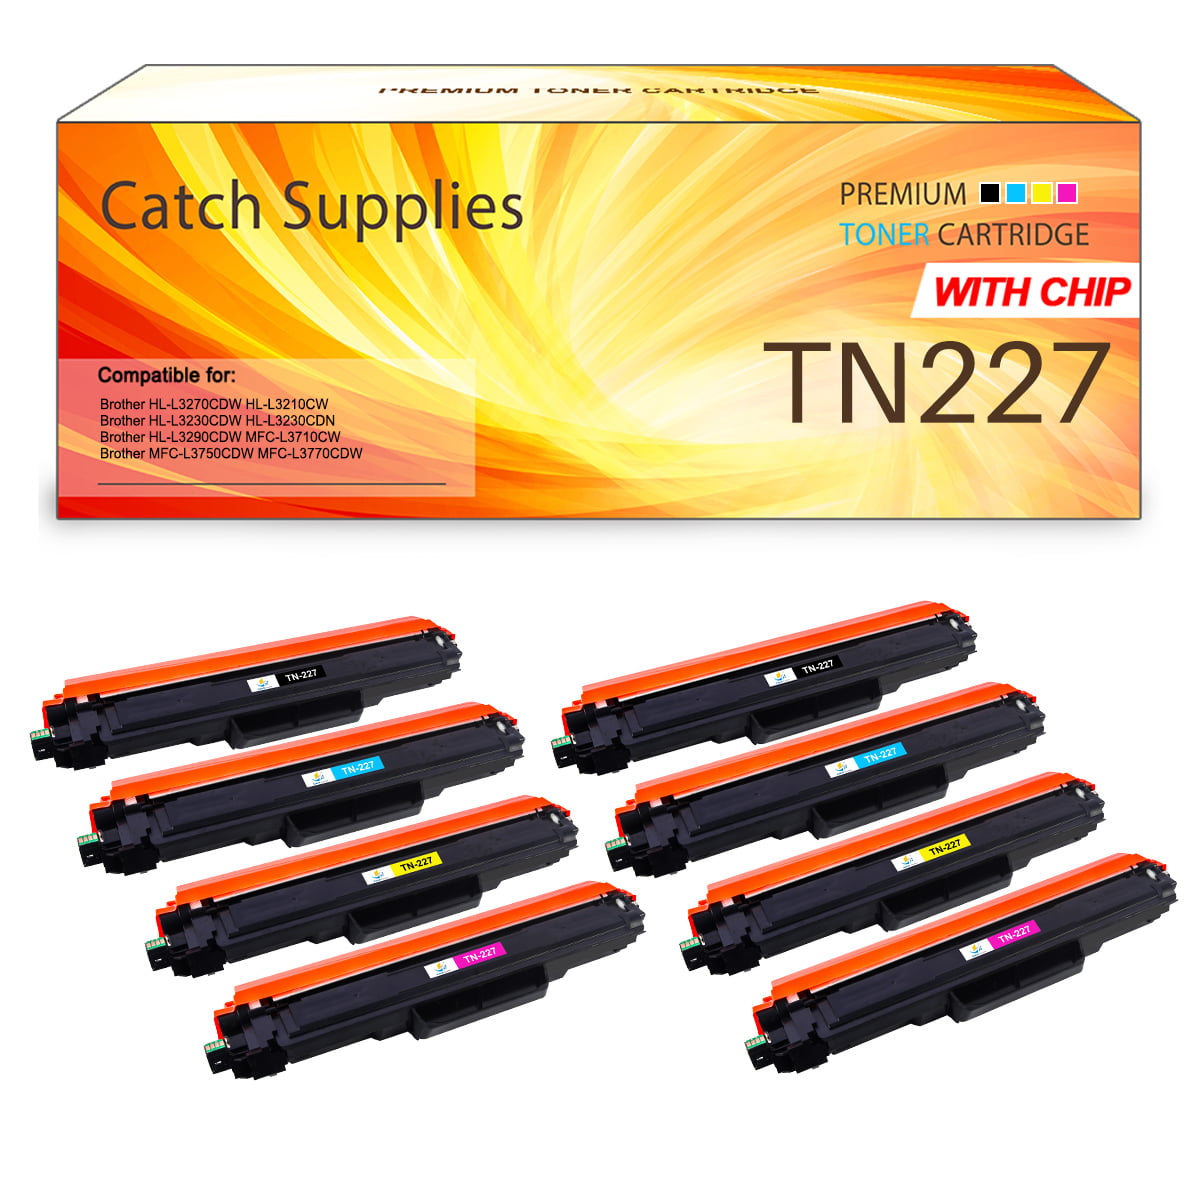 TCT Premium Compatible Toner Cartridge Replacement with Chip for Brother  TN227 TN-227 TN227BK Black Works with Brother HL-L3210CW, MFC-L3750CDW